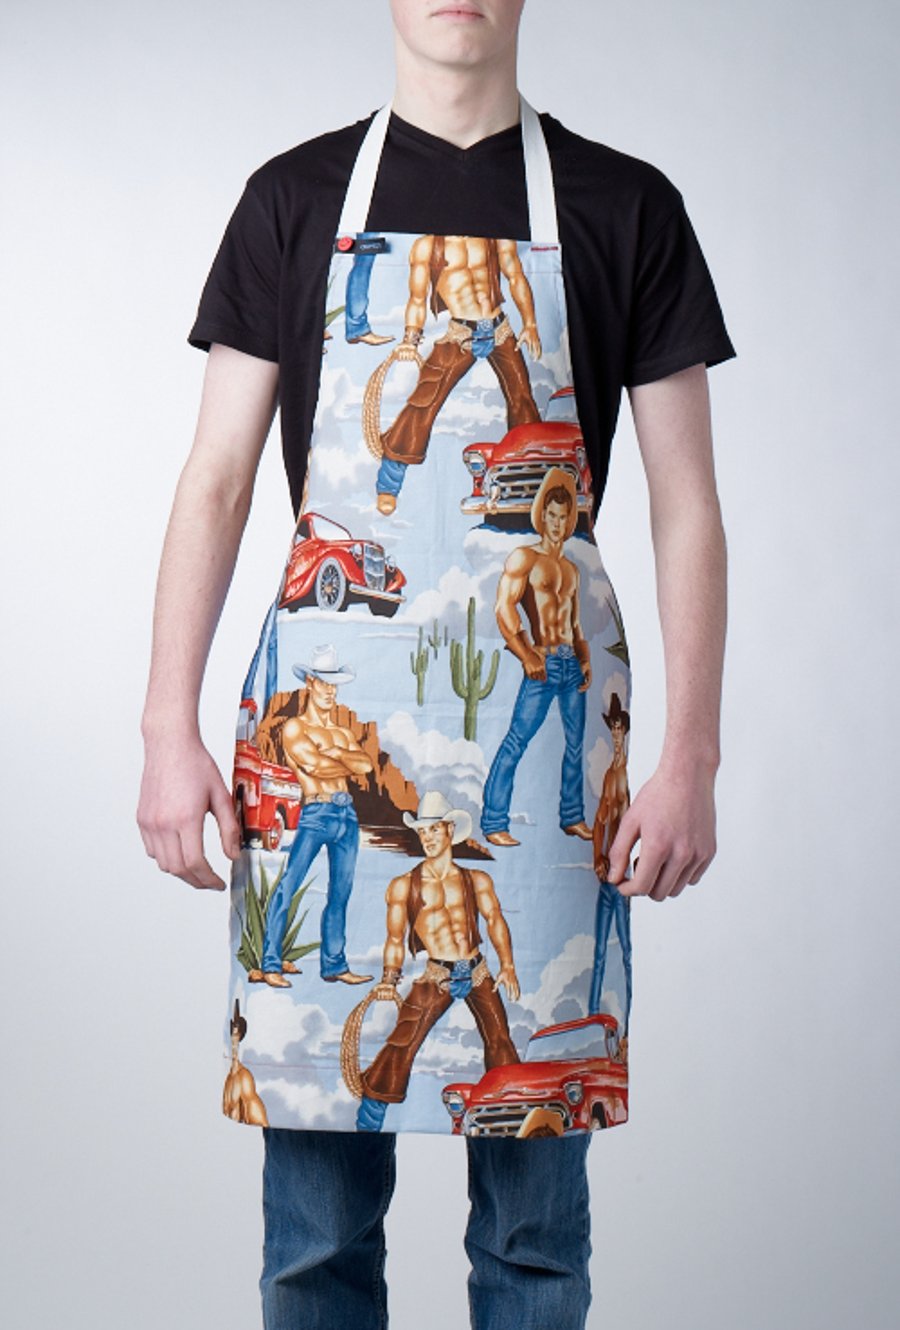 GAYPRONS aprons in retro pin up Wranglers fabric by Alexander Henry